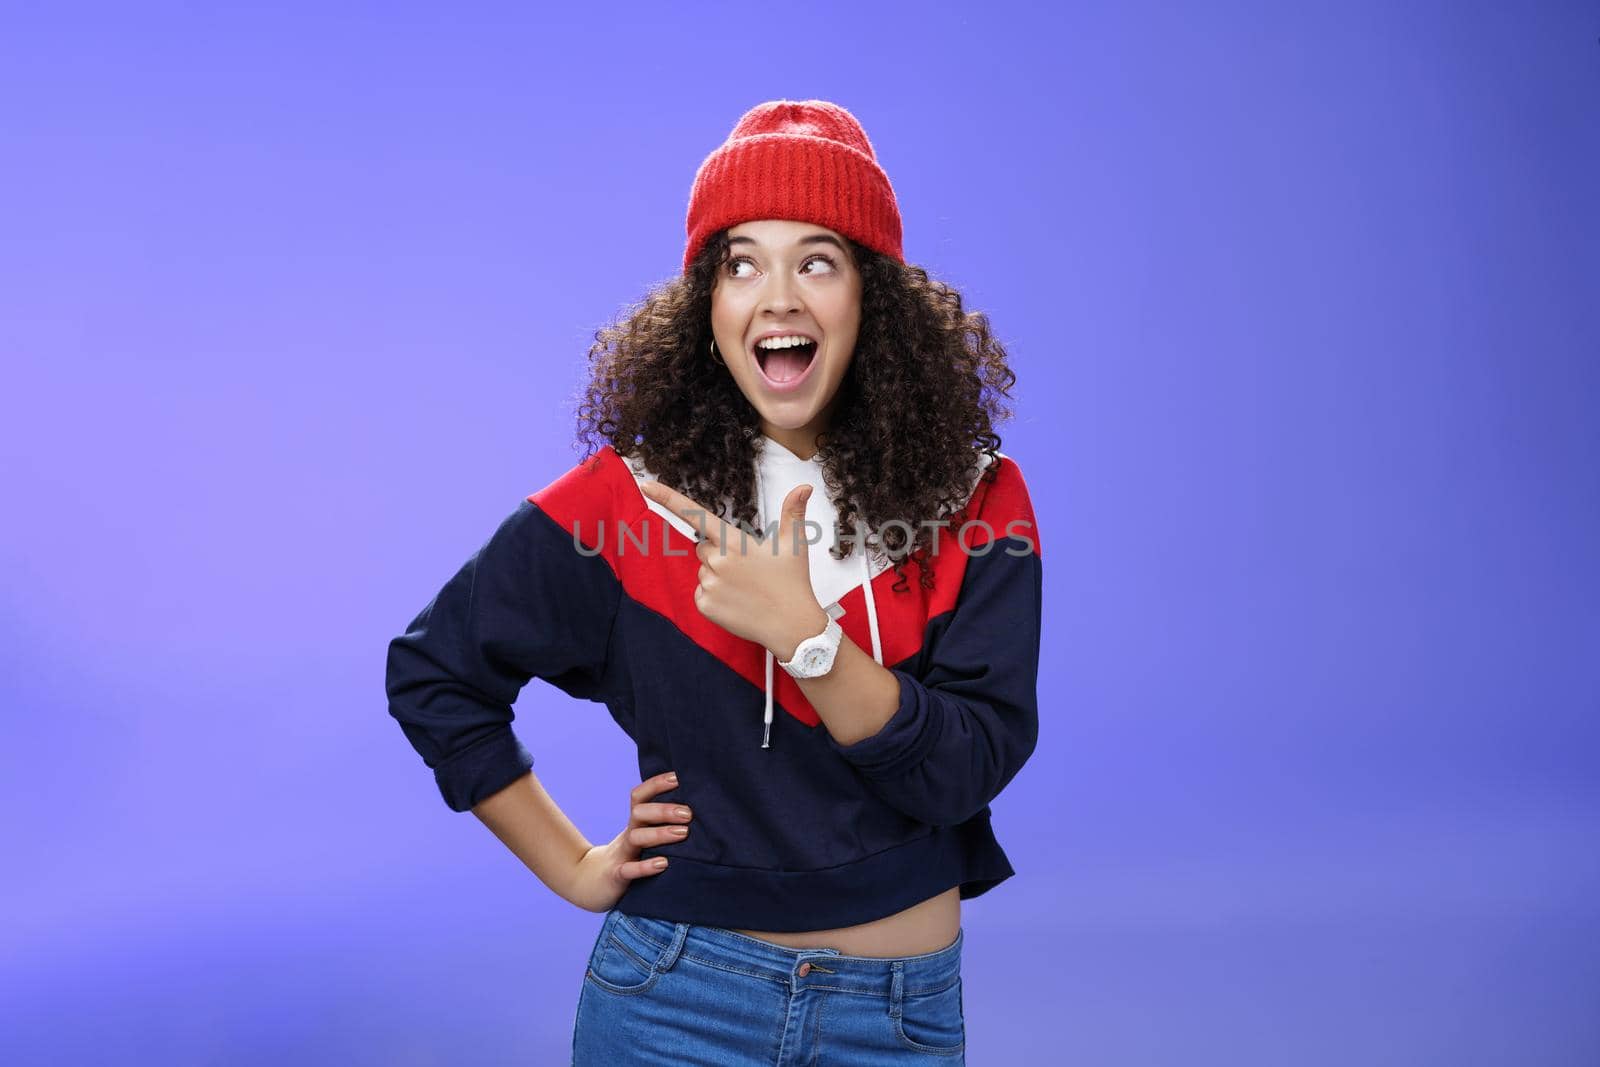 Cute and playful girl in winter stylish outfit and watch smiling broadly with excitement and joy pointing, looking at upper left corner thrilled and joyful as posing over blue background by Benzoix